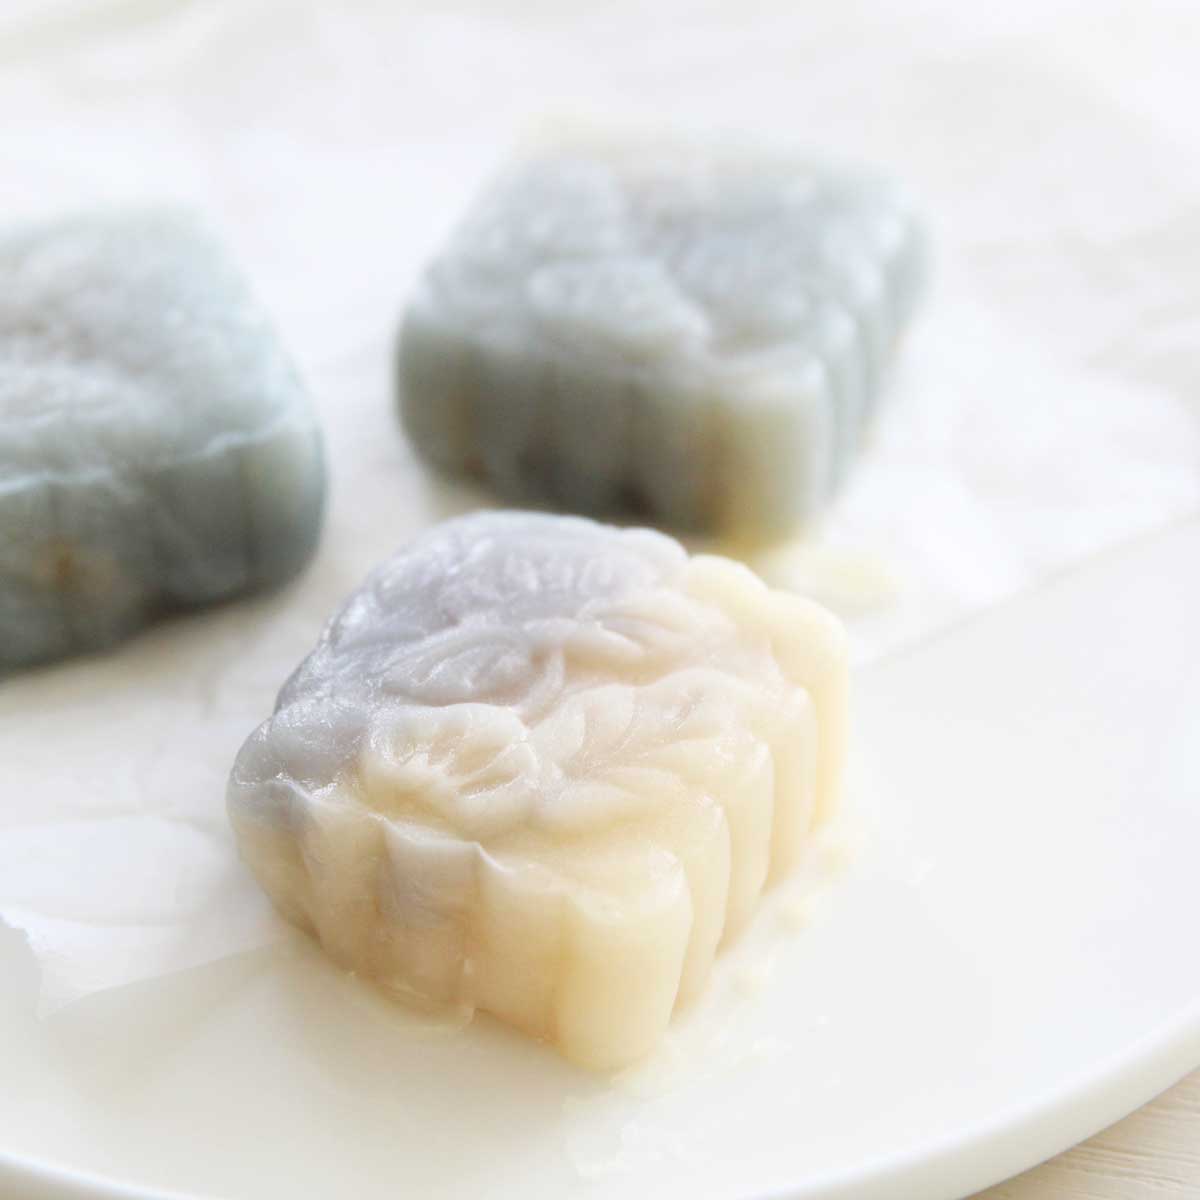 10 Minute Butterfly Pea Snowskin Mooncakes (No Steaming Required!) - Japanese Matcha Roll Cake